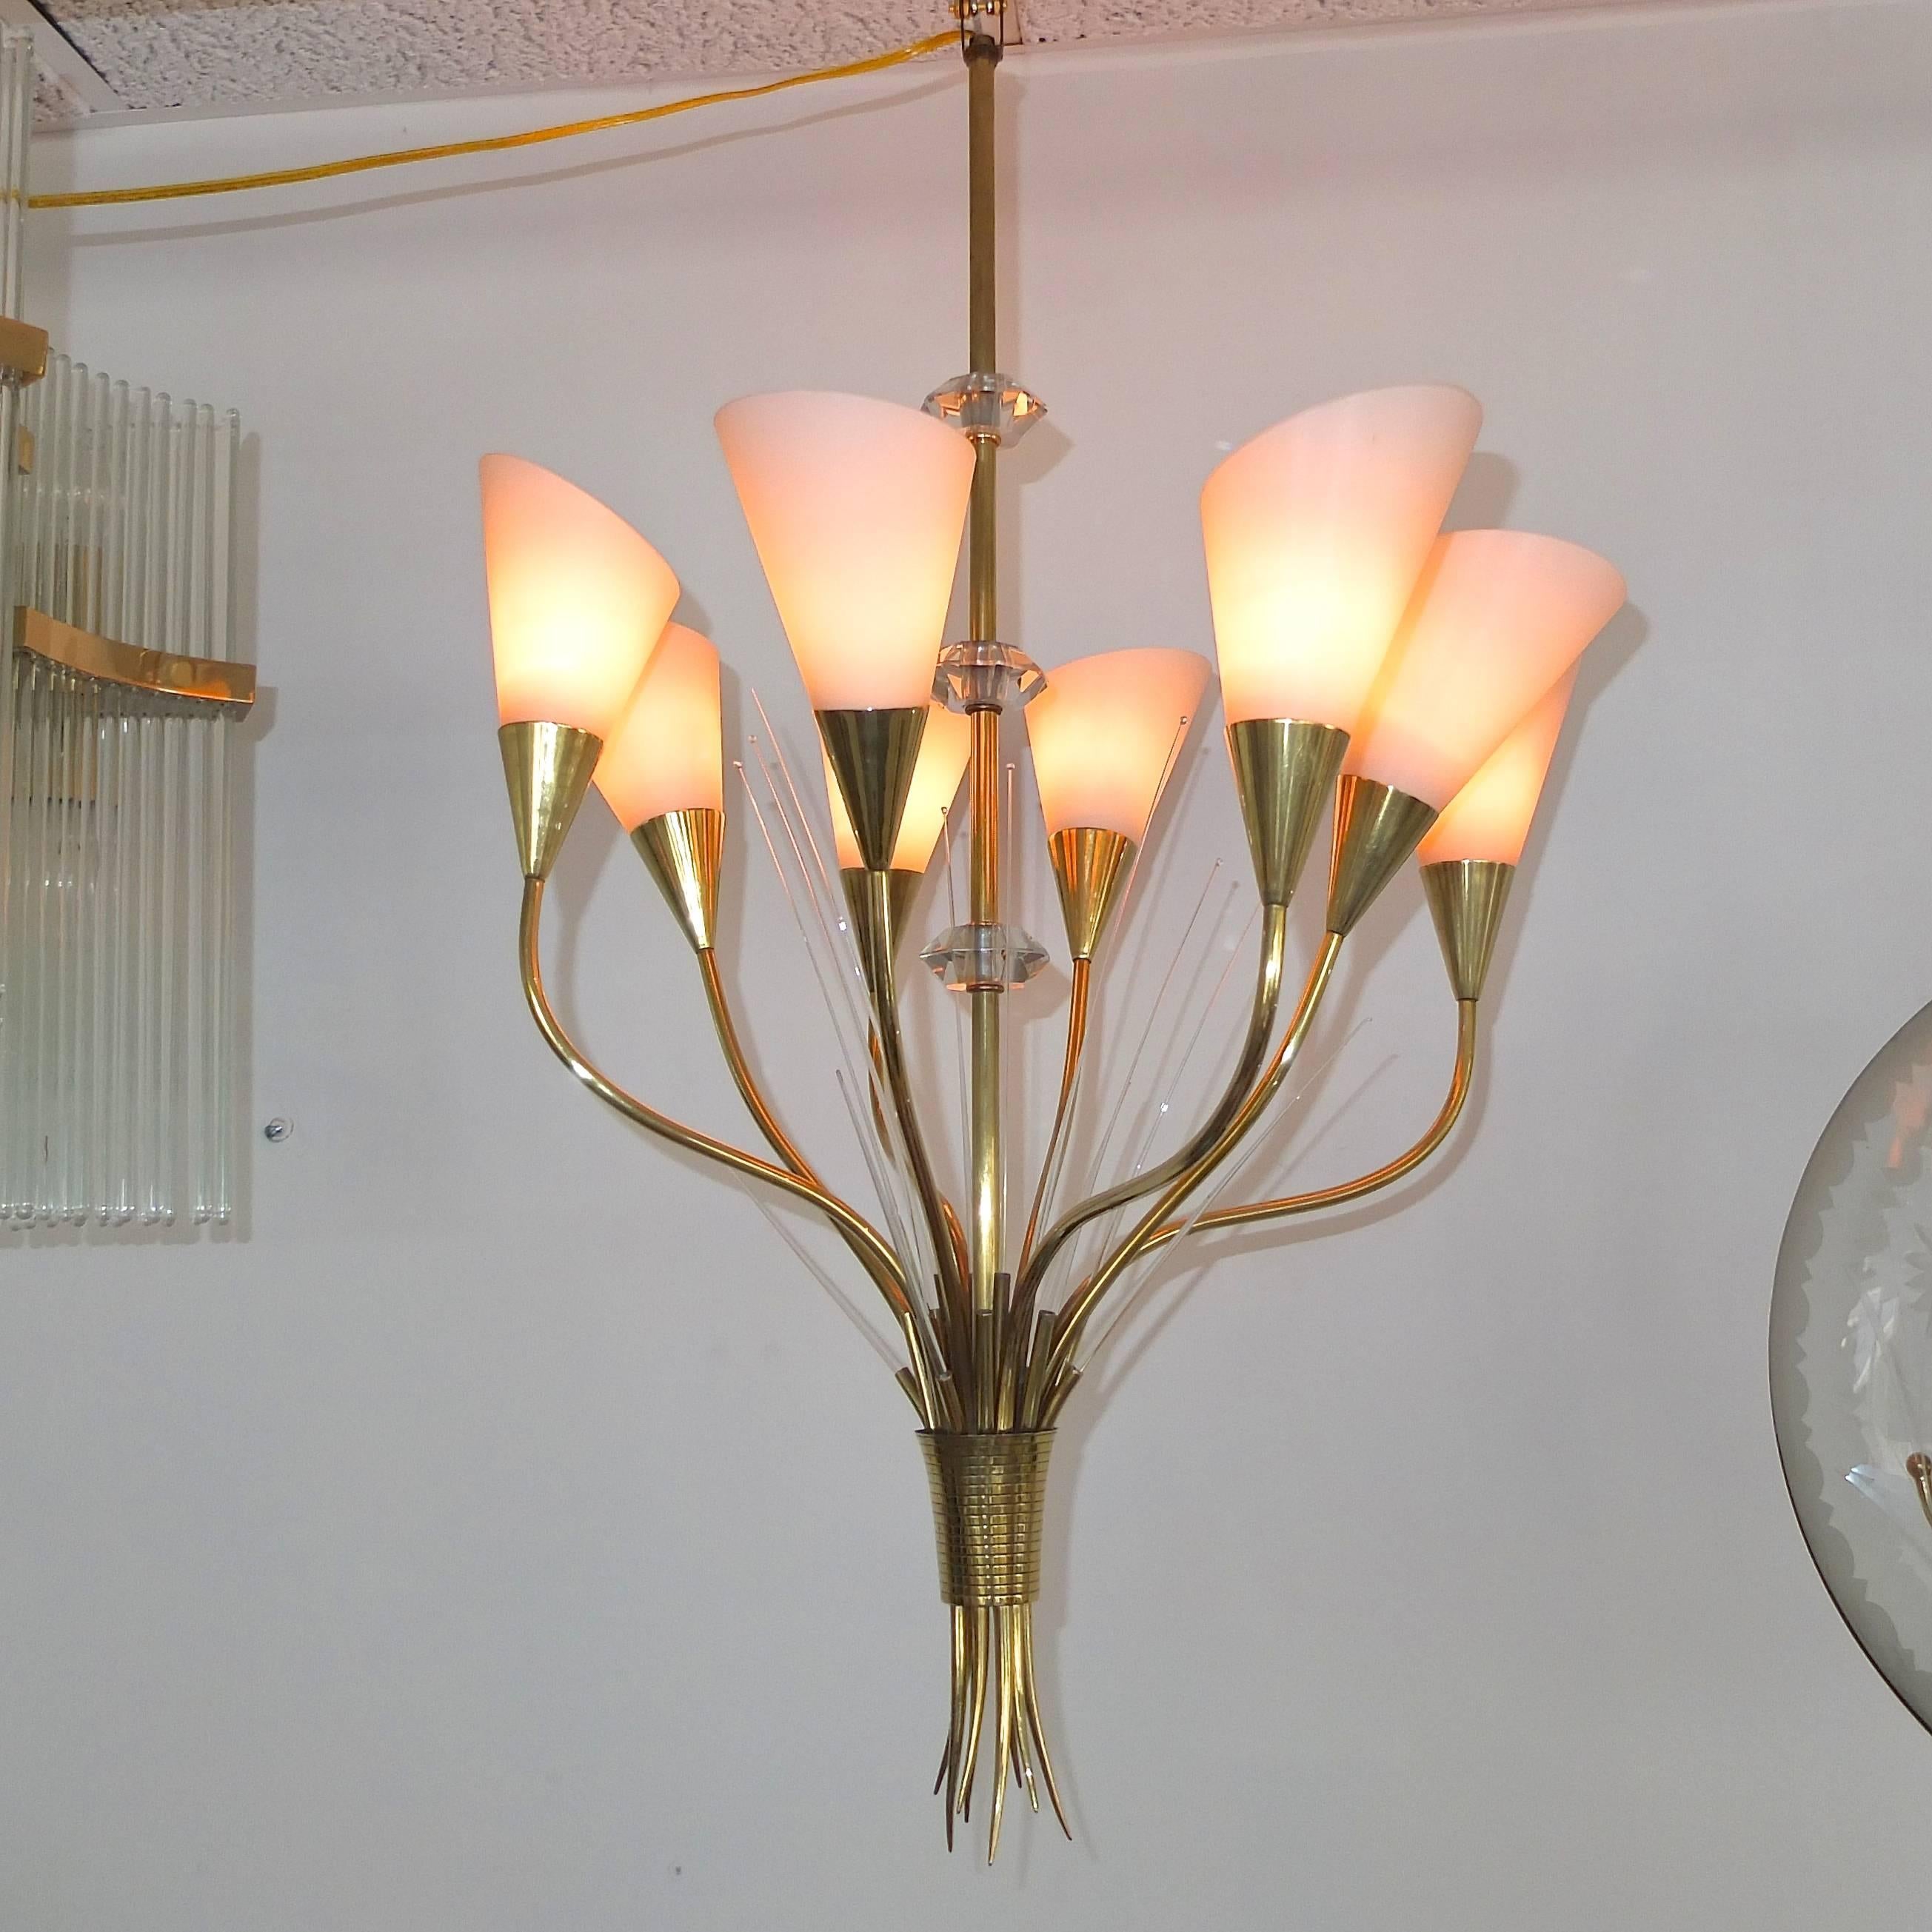 Very rare original chandelier from Maison Arlus, France, circa 1955. Chandelier is in the form of a bouquet of flowers. Eight arms bent organically to represent long stems with white satin glass shades like lily flowers inside brass cone base. The